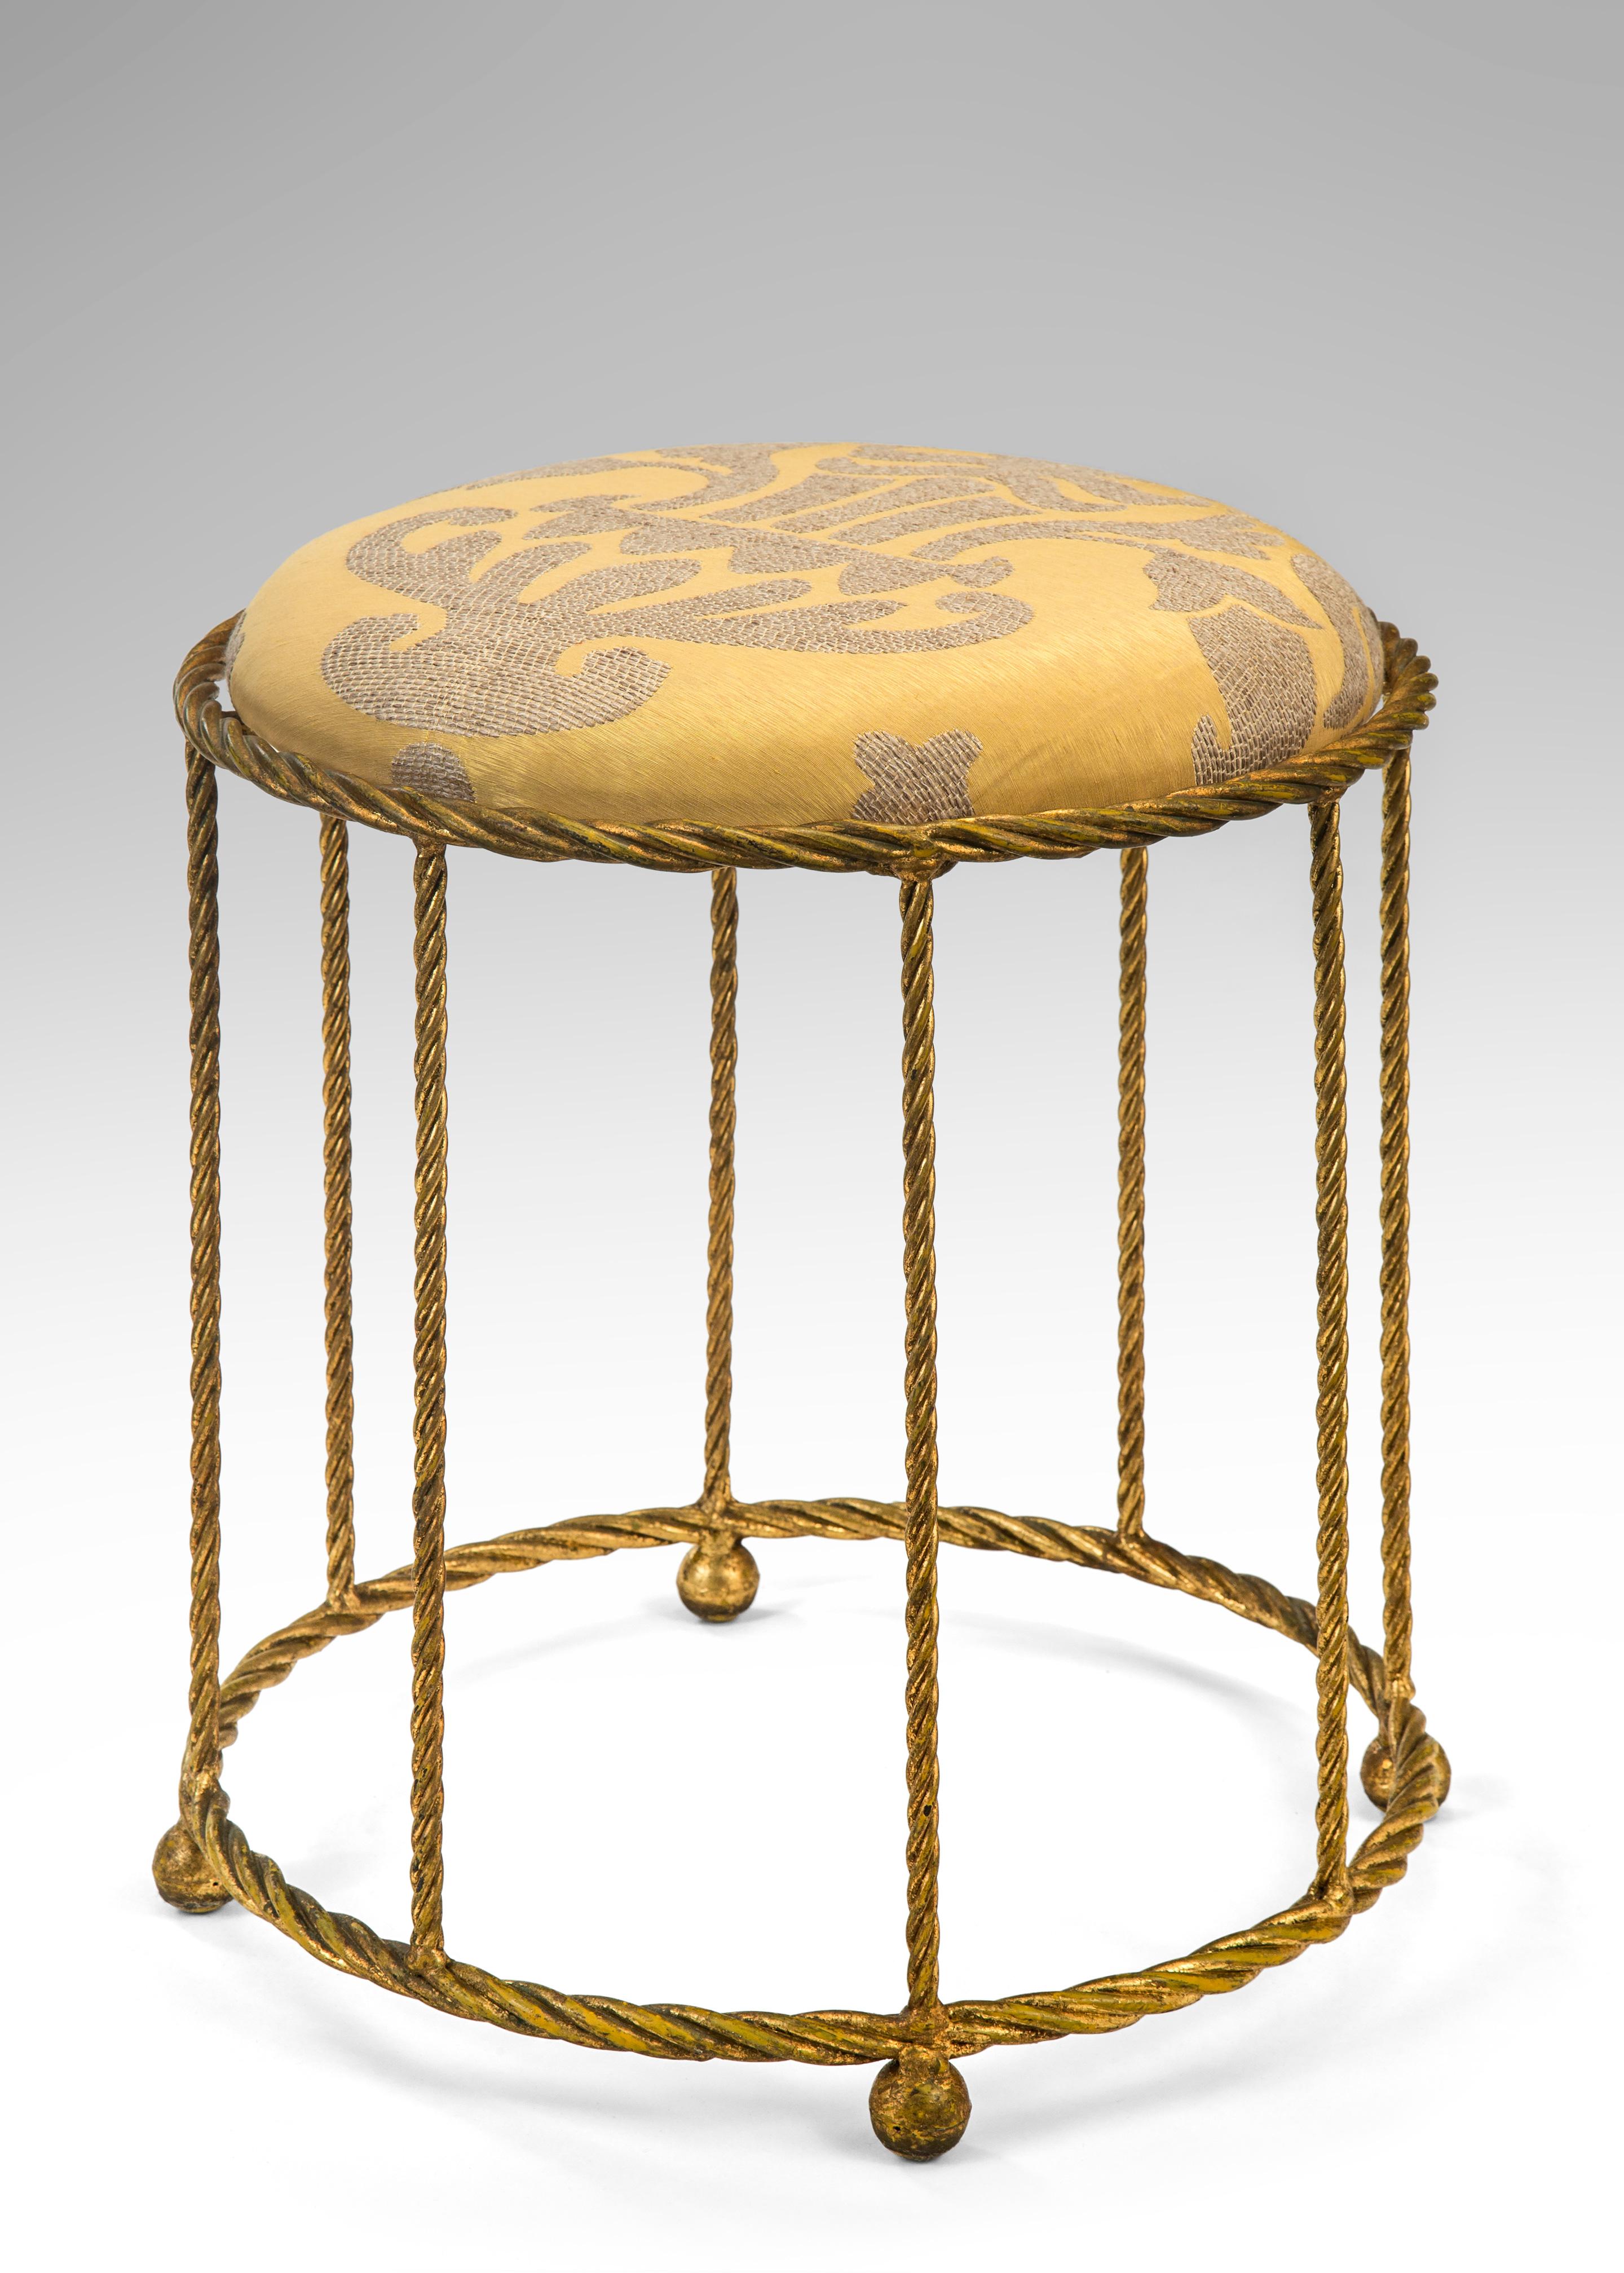 A French gilt metal rope twist stool
Mid-20th century
Get comfortable on this simple and elegant stool. The circular upholstered seat supported by the rope twist frame on spherical feet.